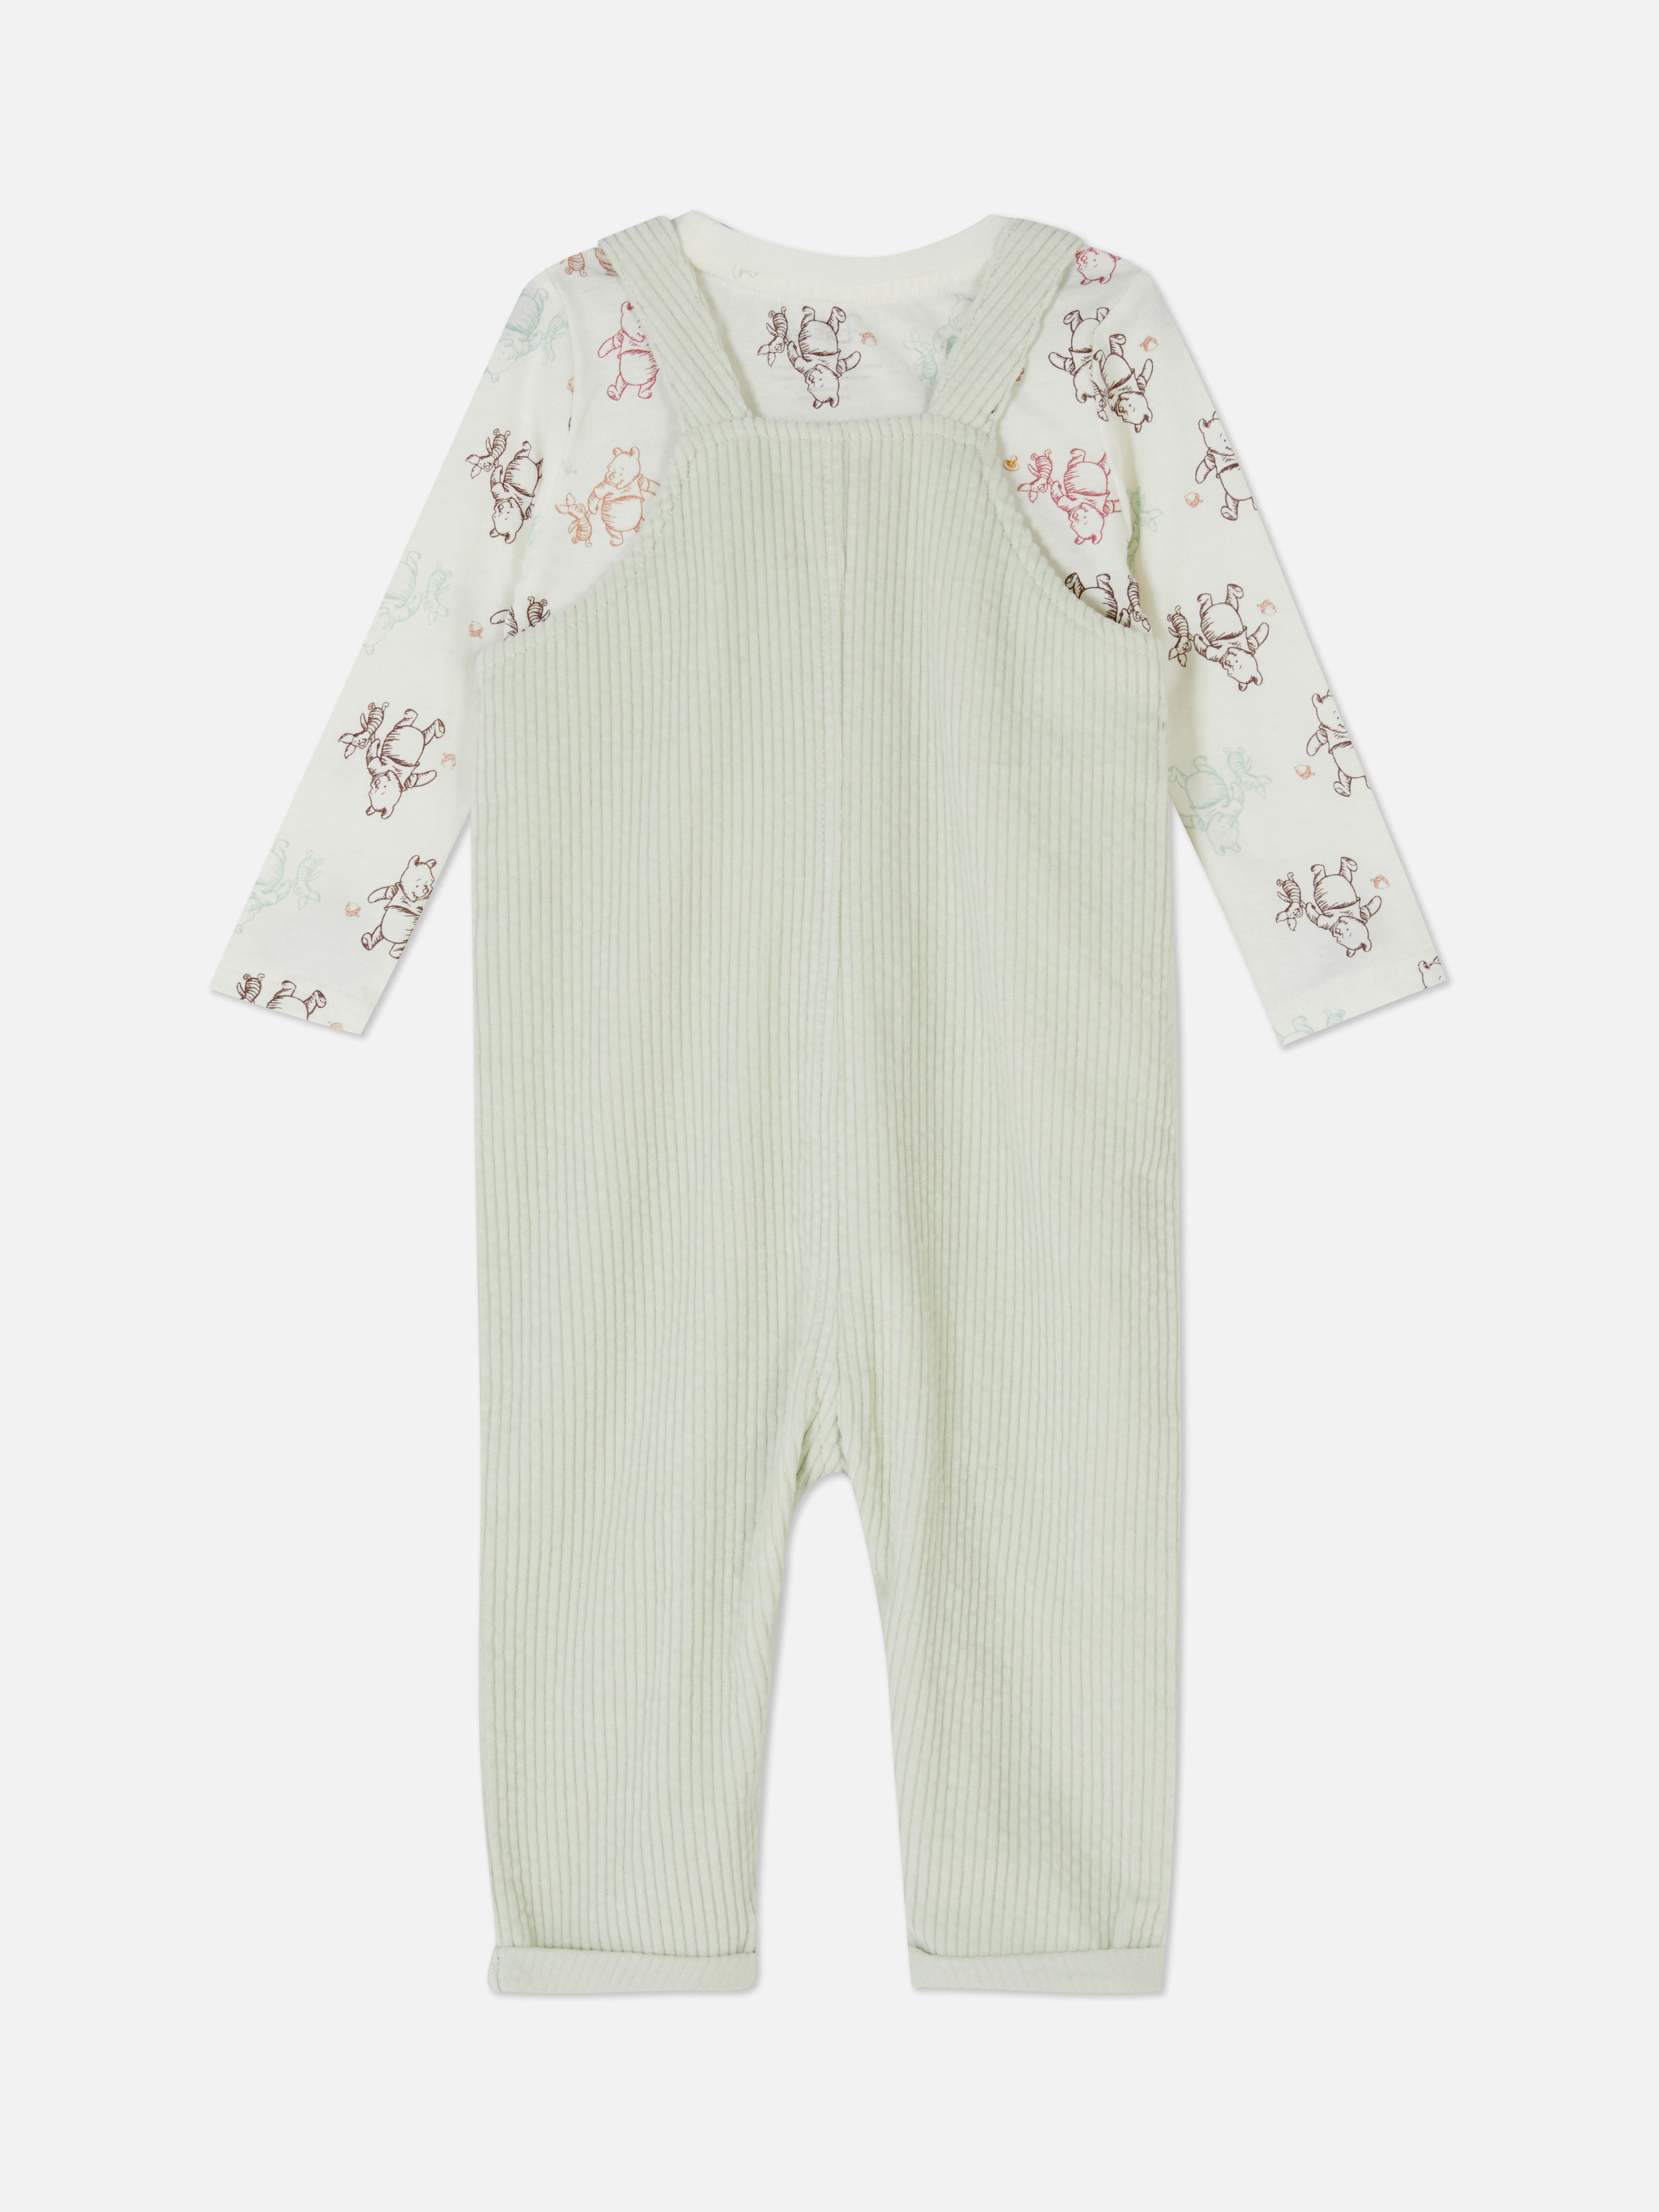 Multicolored 9-12M discount 63% KIDS FASHION Baby Jumpsuits & Dungarees Print Primark dungaree 